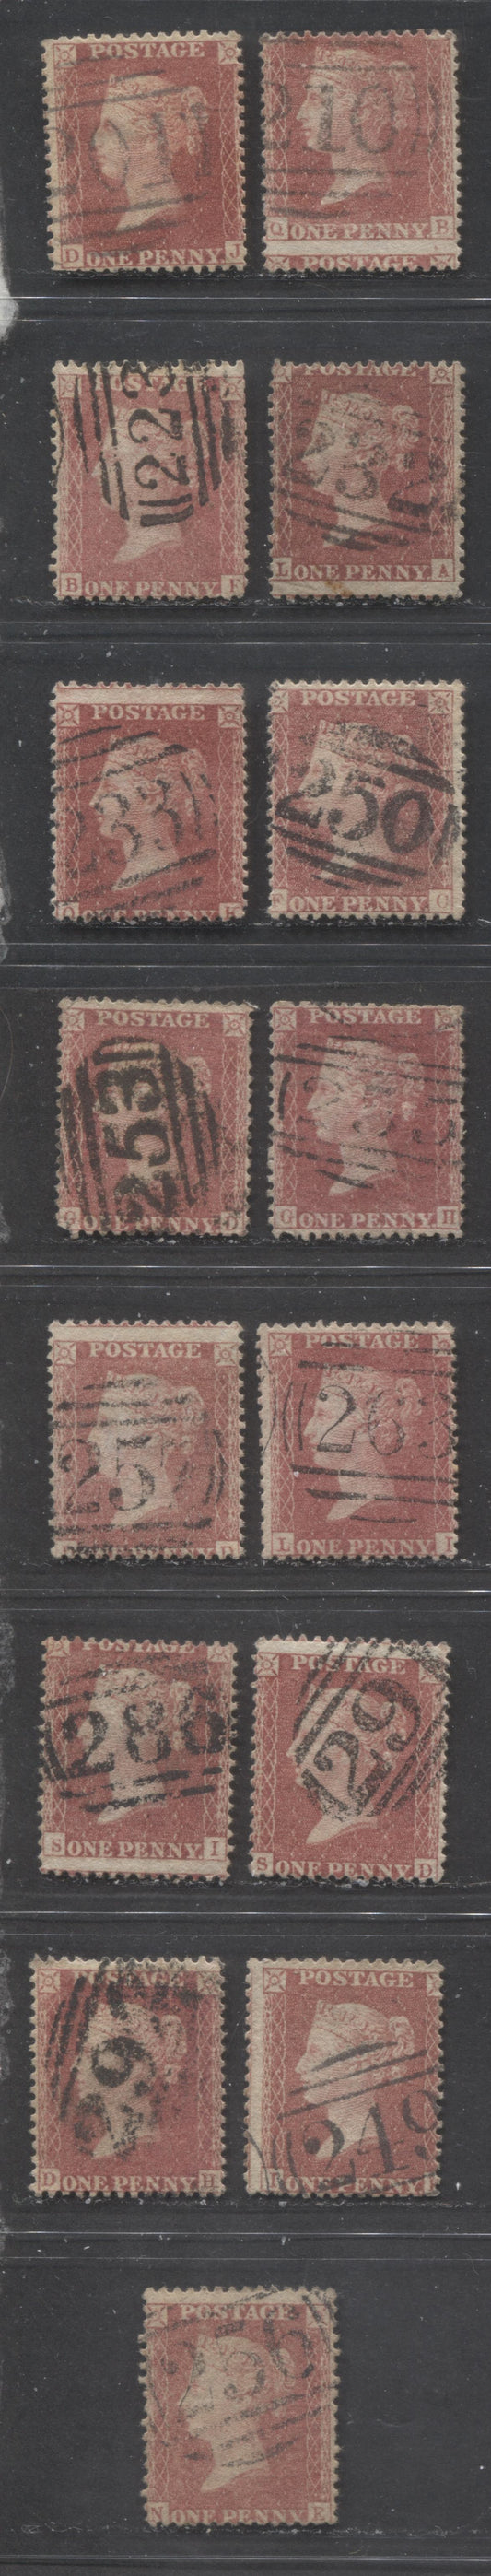 Lot  441 Great Britain - Barred Numeral Cancels For England & Wales: 200-299 SC#20 1d Rose red & Deep Rose Red 1857-1863 1d Red Stars, Large Crown, White Paper, Perf. 14 Issue, #201/#291, 15 Good & VG Used Singles, Estimated Value $96